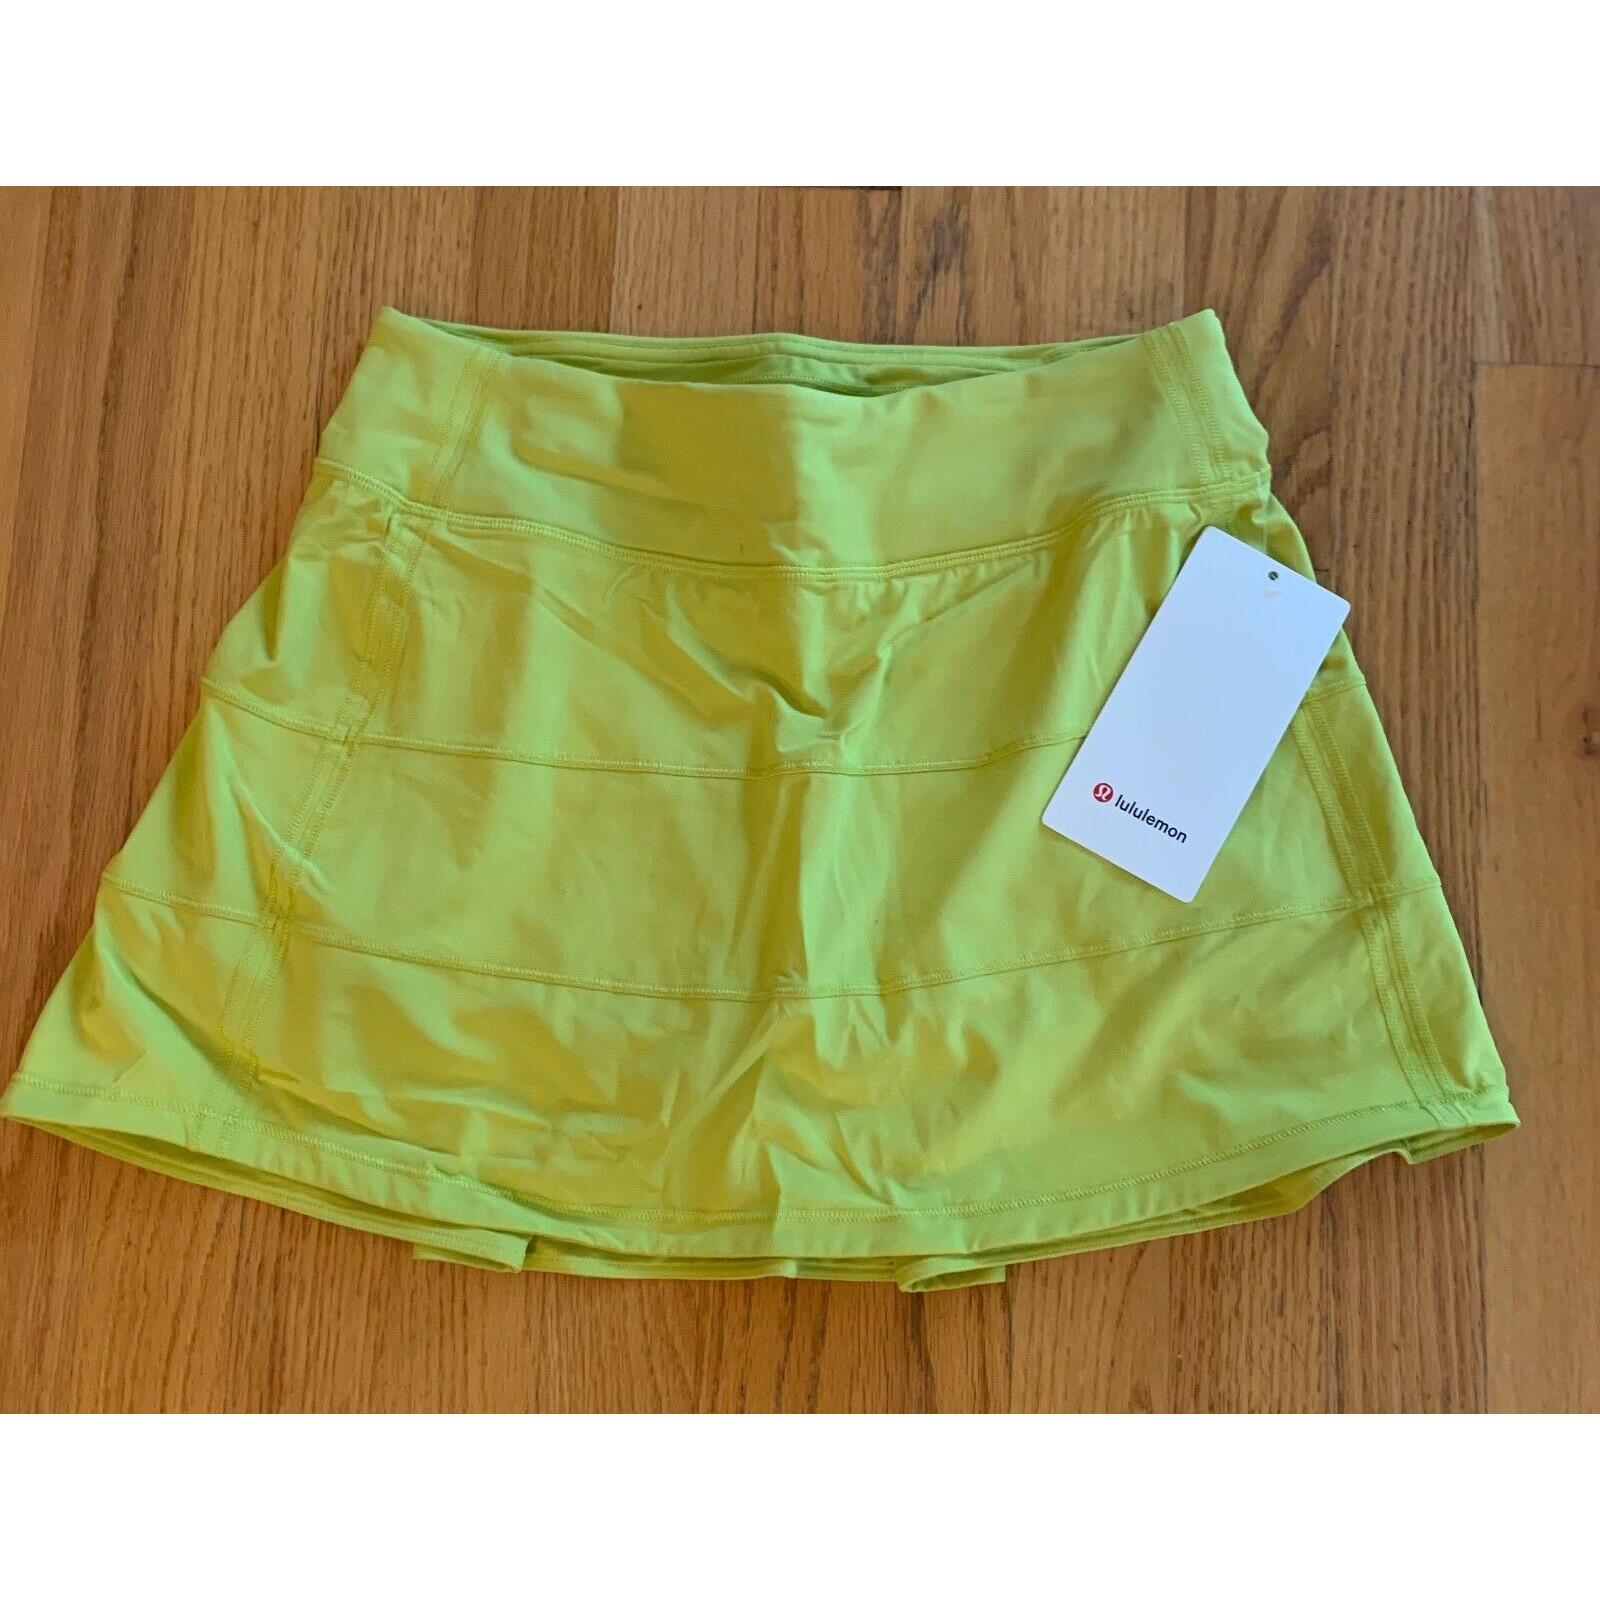 Lululemon Pace Rival Mid Rise Skirt Tall 15 Size 6 Yellow Serpentine Ylsr